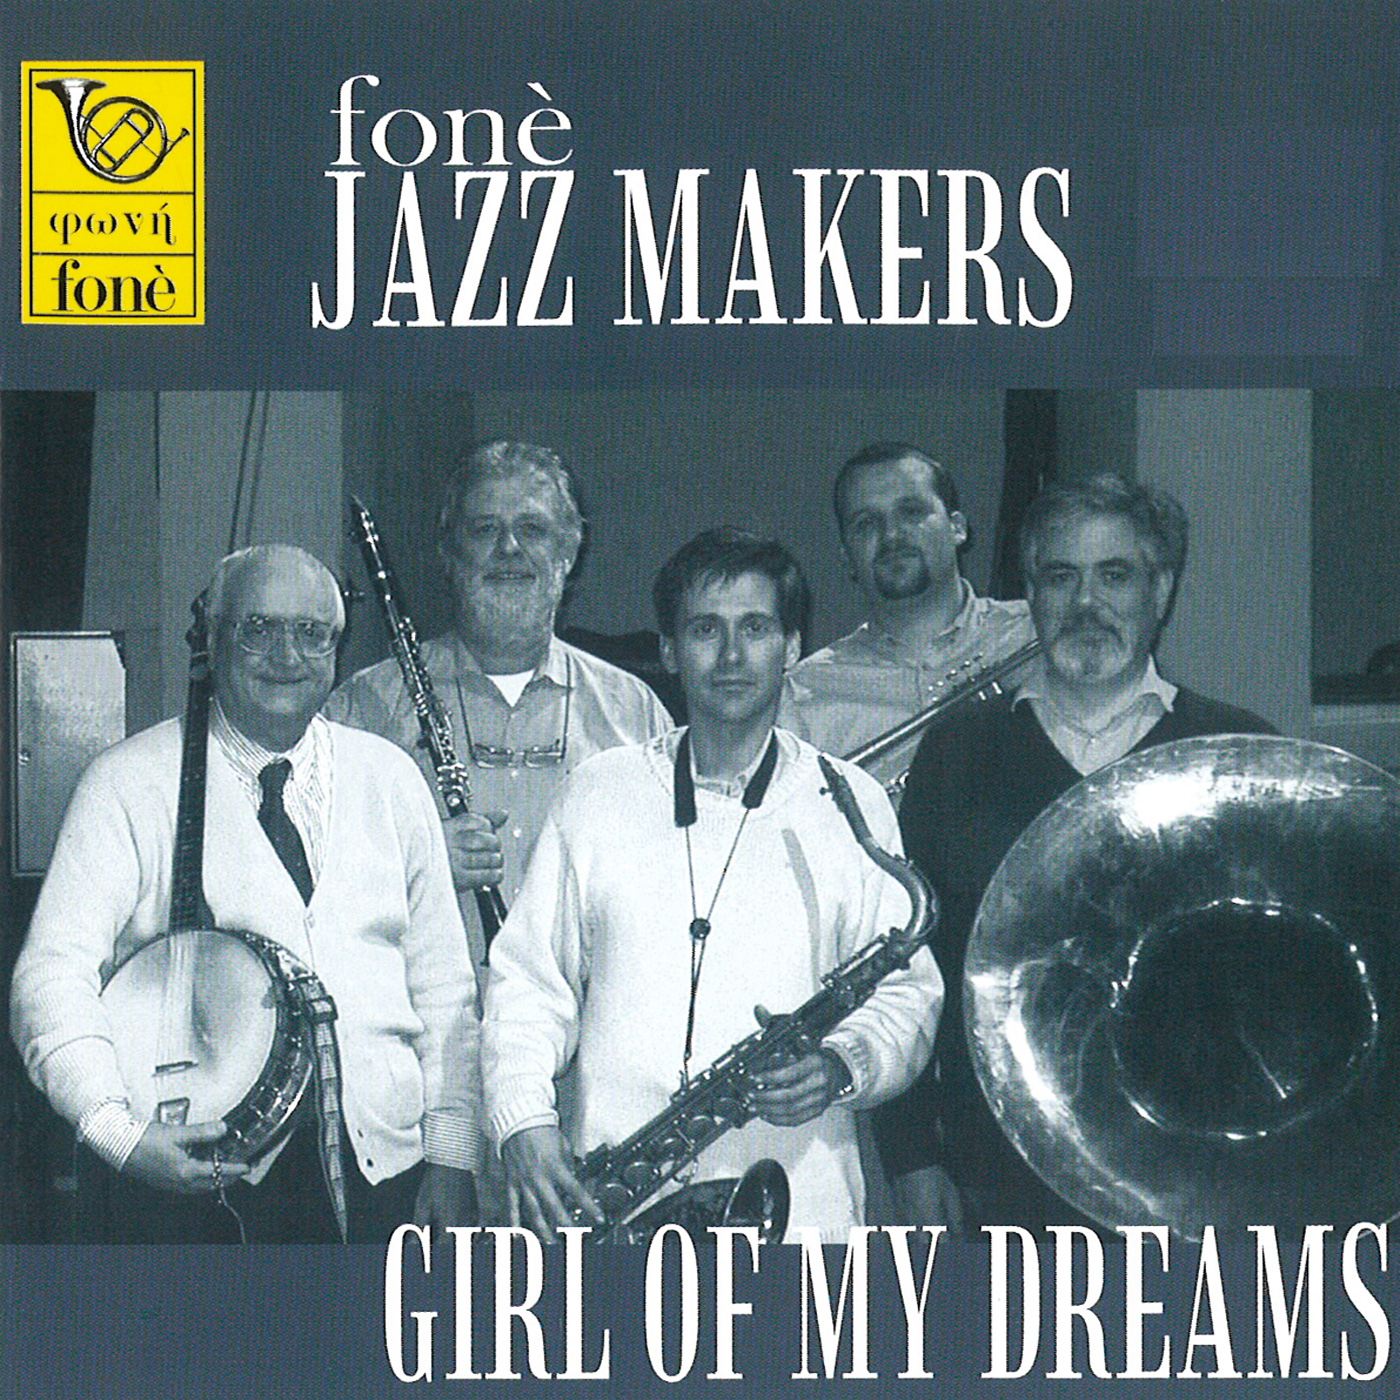 Fone Jazz Makers – Girl Of My Dreams (2001) SACD ISO + DSF DSD64 + Hi-Res FLAC